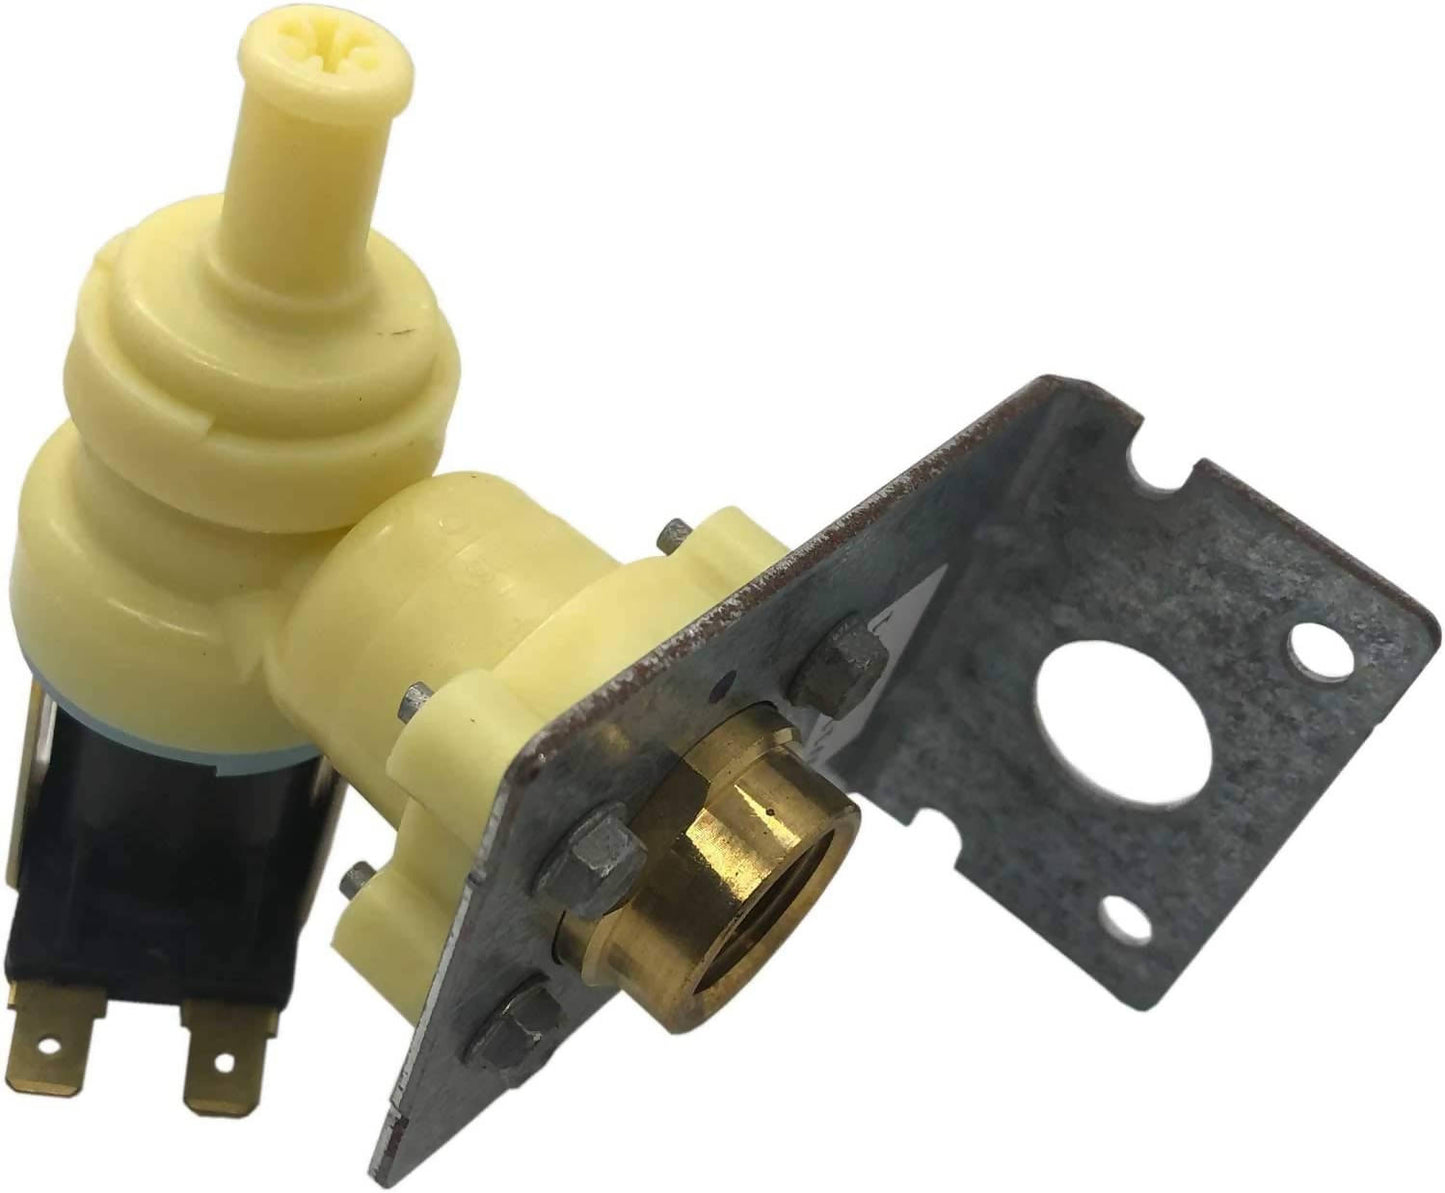 Whirlpool Dishwasher Water Inlet Valve - W11082871, Replaces: 1515140 99002975 AH2365872 W10872729 WP6-920534 OEM PARTS WORLD